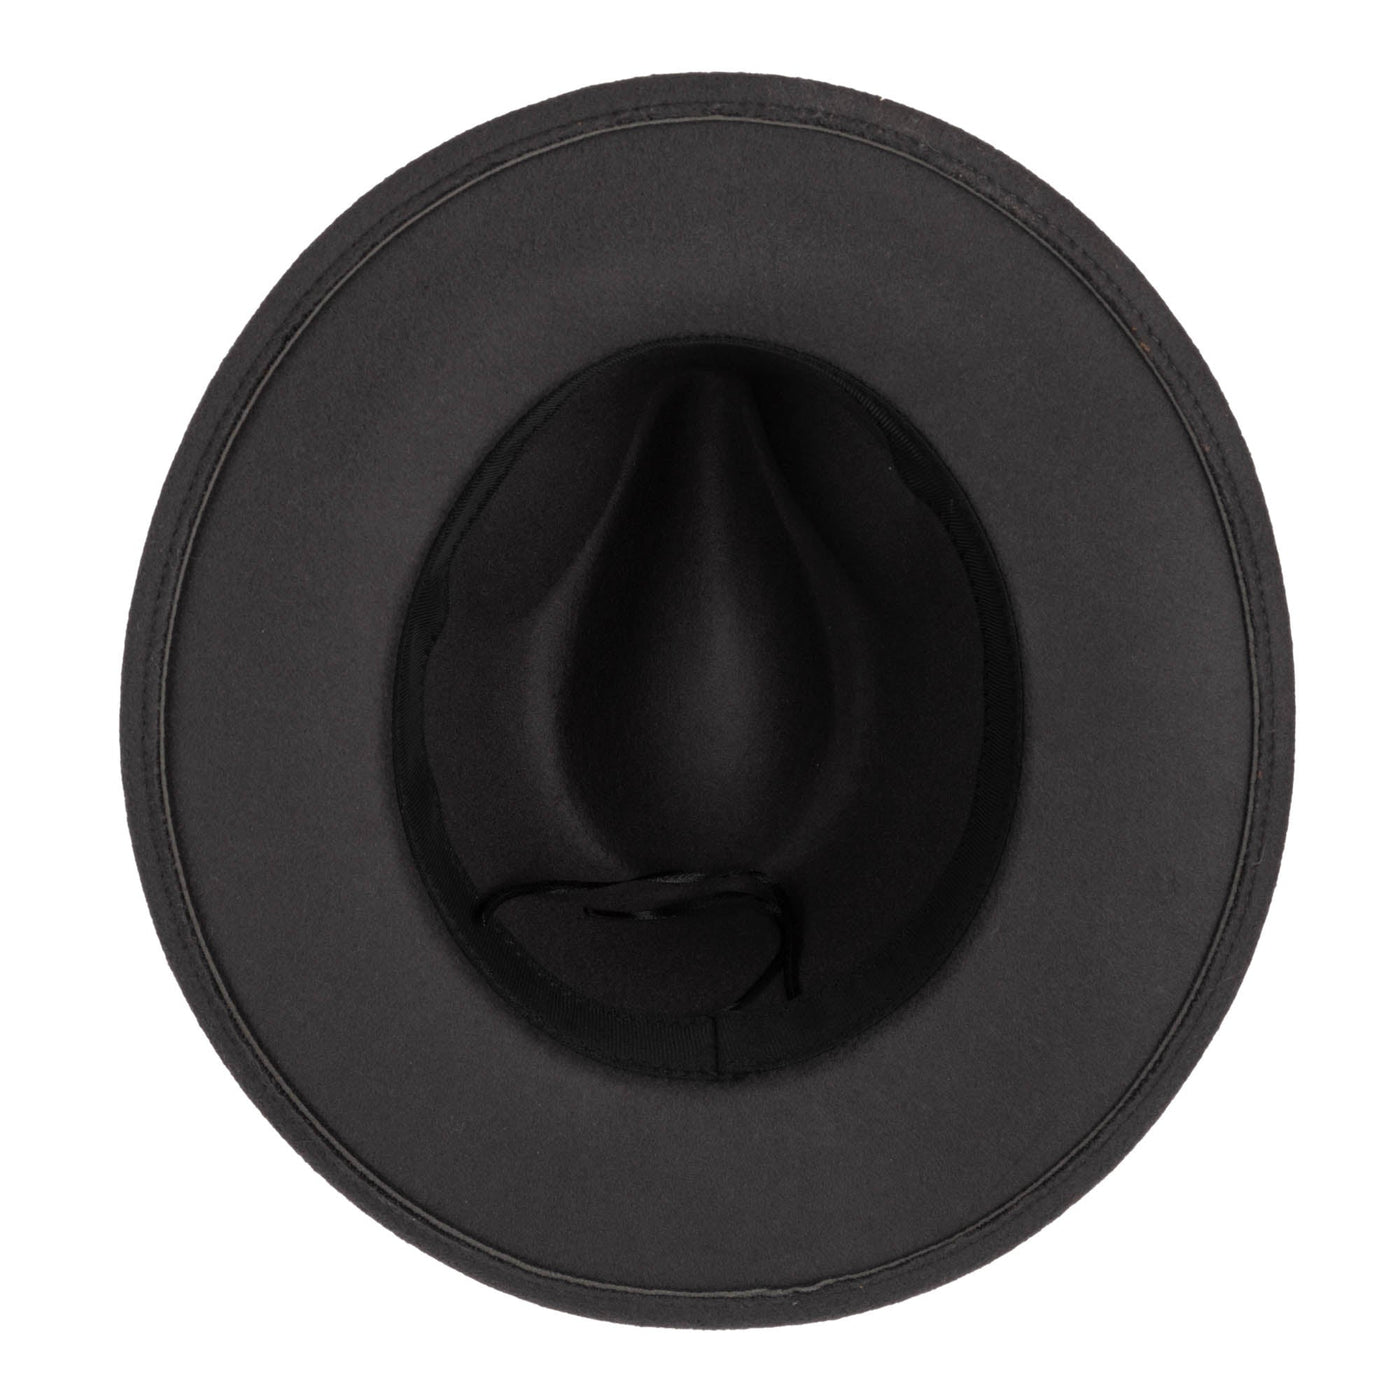 FEDORA - Fedora With Faux Leather Band And Metal Snap Back Closure